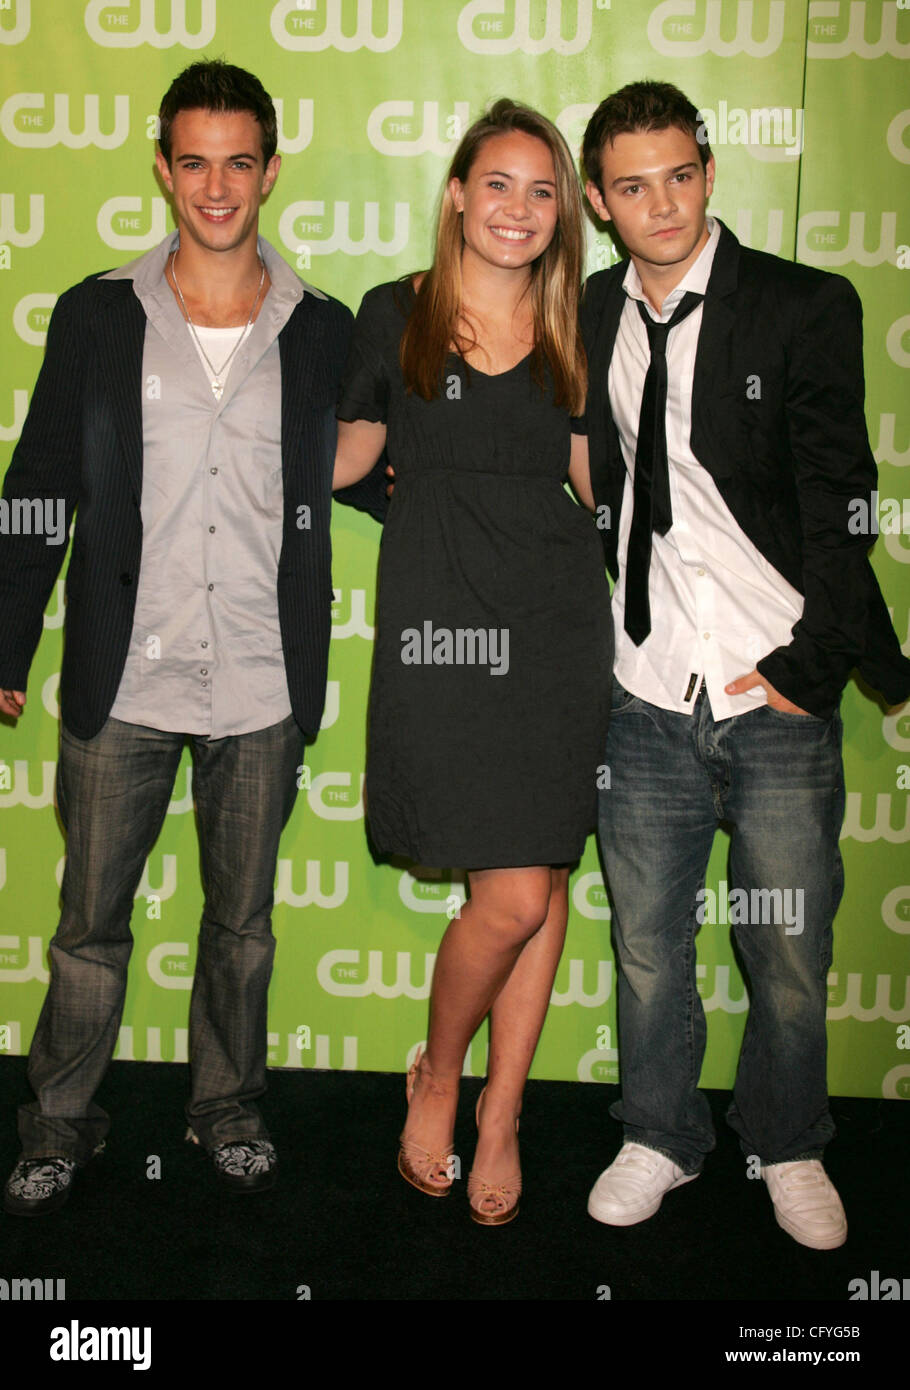 May 17, 2007 - New York, NY, USA - Actors ANDREW ST. JOHN, LEAH PIPES and CALVIN GOLDSPINK at the arrivals for the CW Primetime Preview 2007-2008 Upfront held at Madison Square Garden. (Credit Image: © Nancy Kaszerman/ZUMA Press) Stock Photo